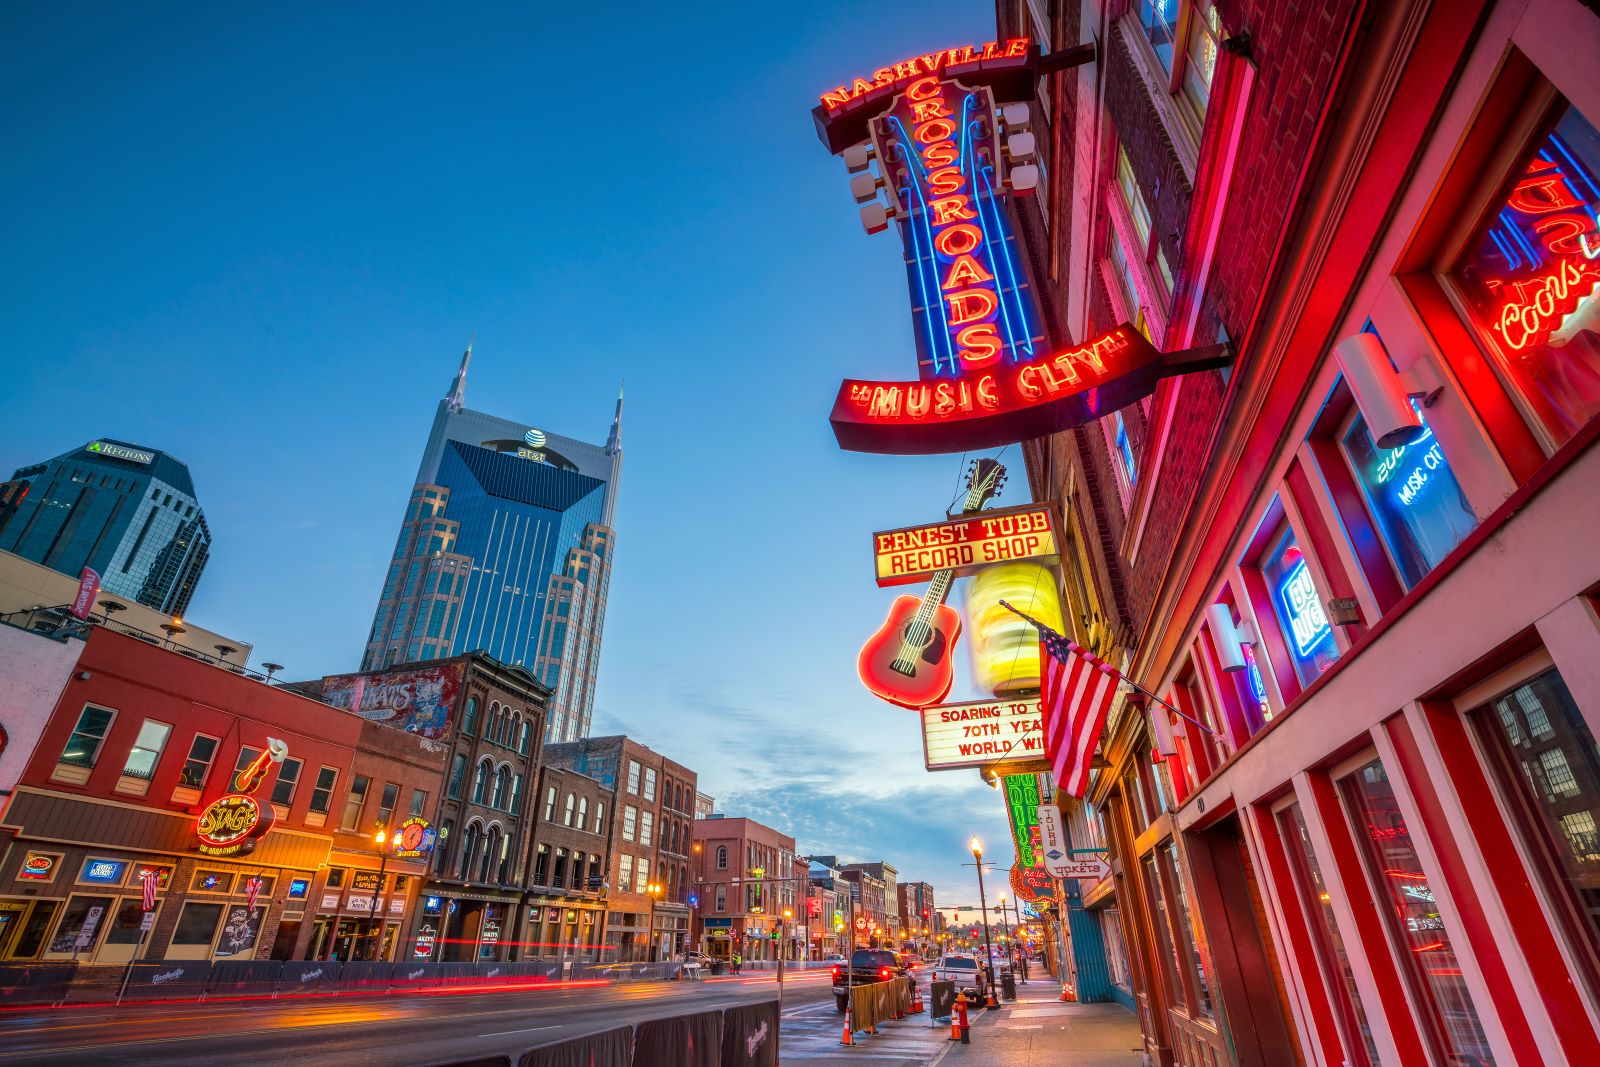 <p class="wp-caption-text">Image Credit: Shutterstock / f11photo</p>  <p>Nashville, the heart of country music, offers free live music in many bars and parks. Visit the Country Music Hall of Fame on discount days, and explore the vibrant Broadway area.</p>